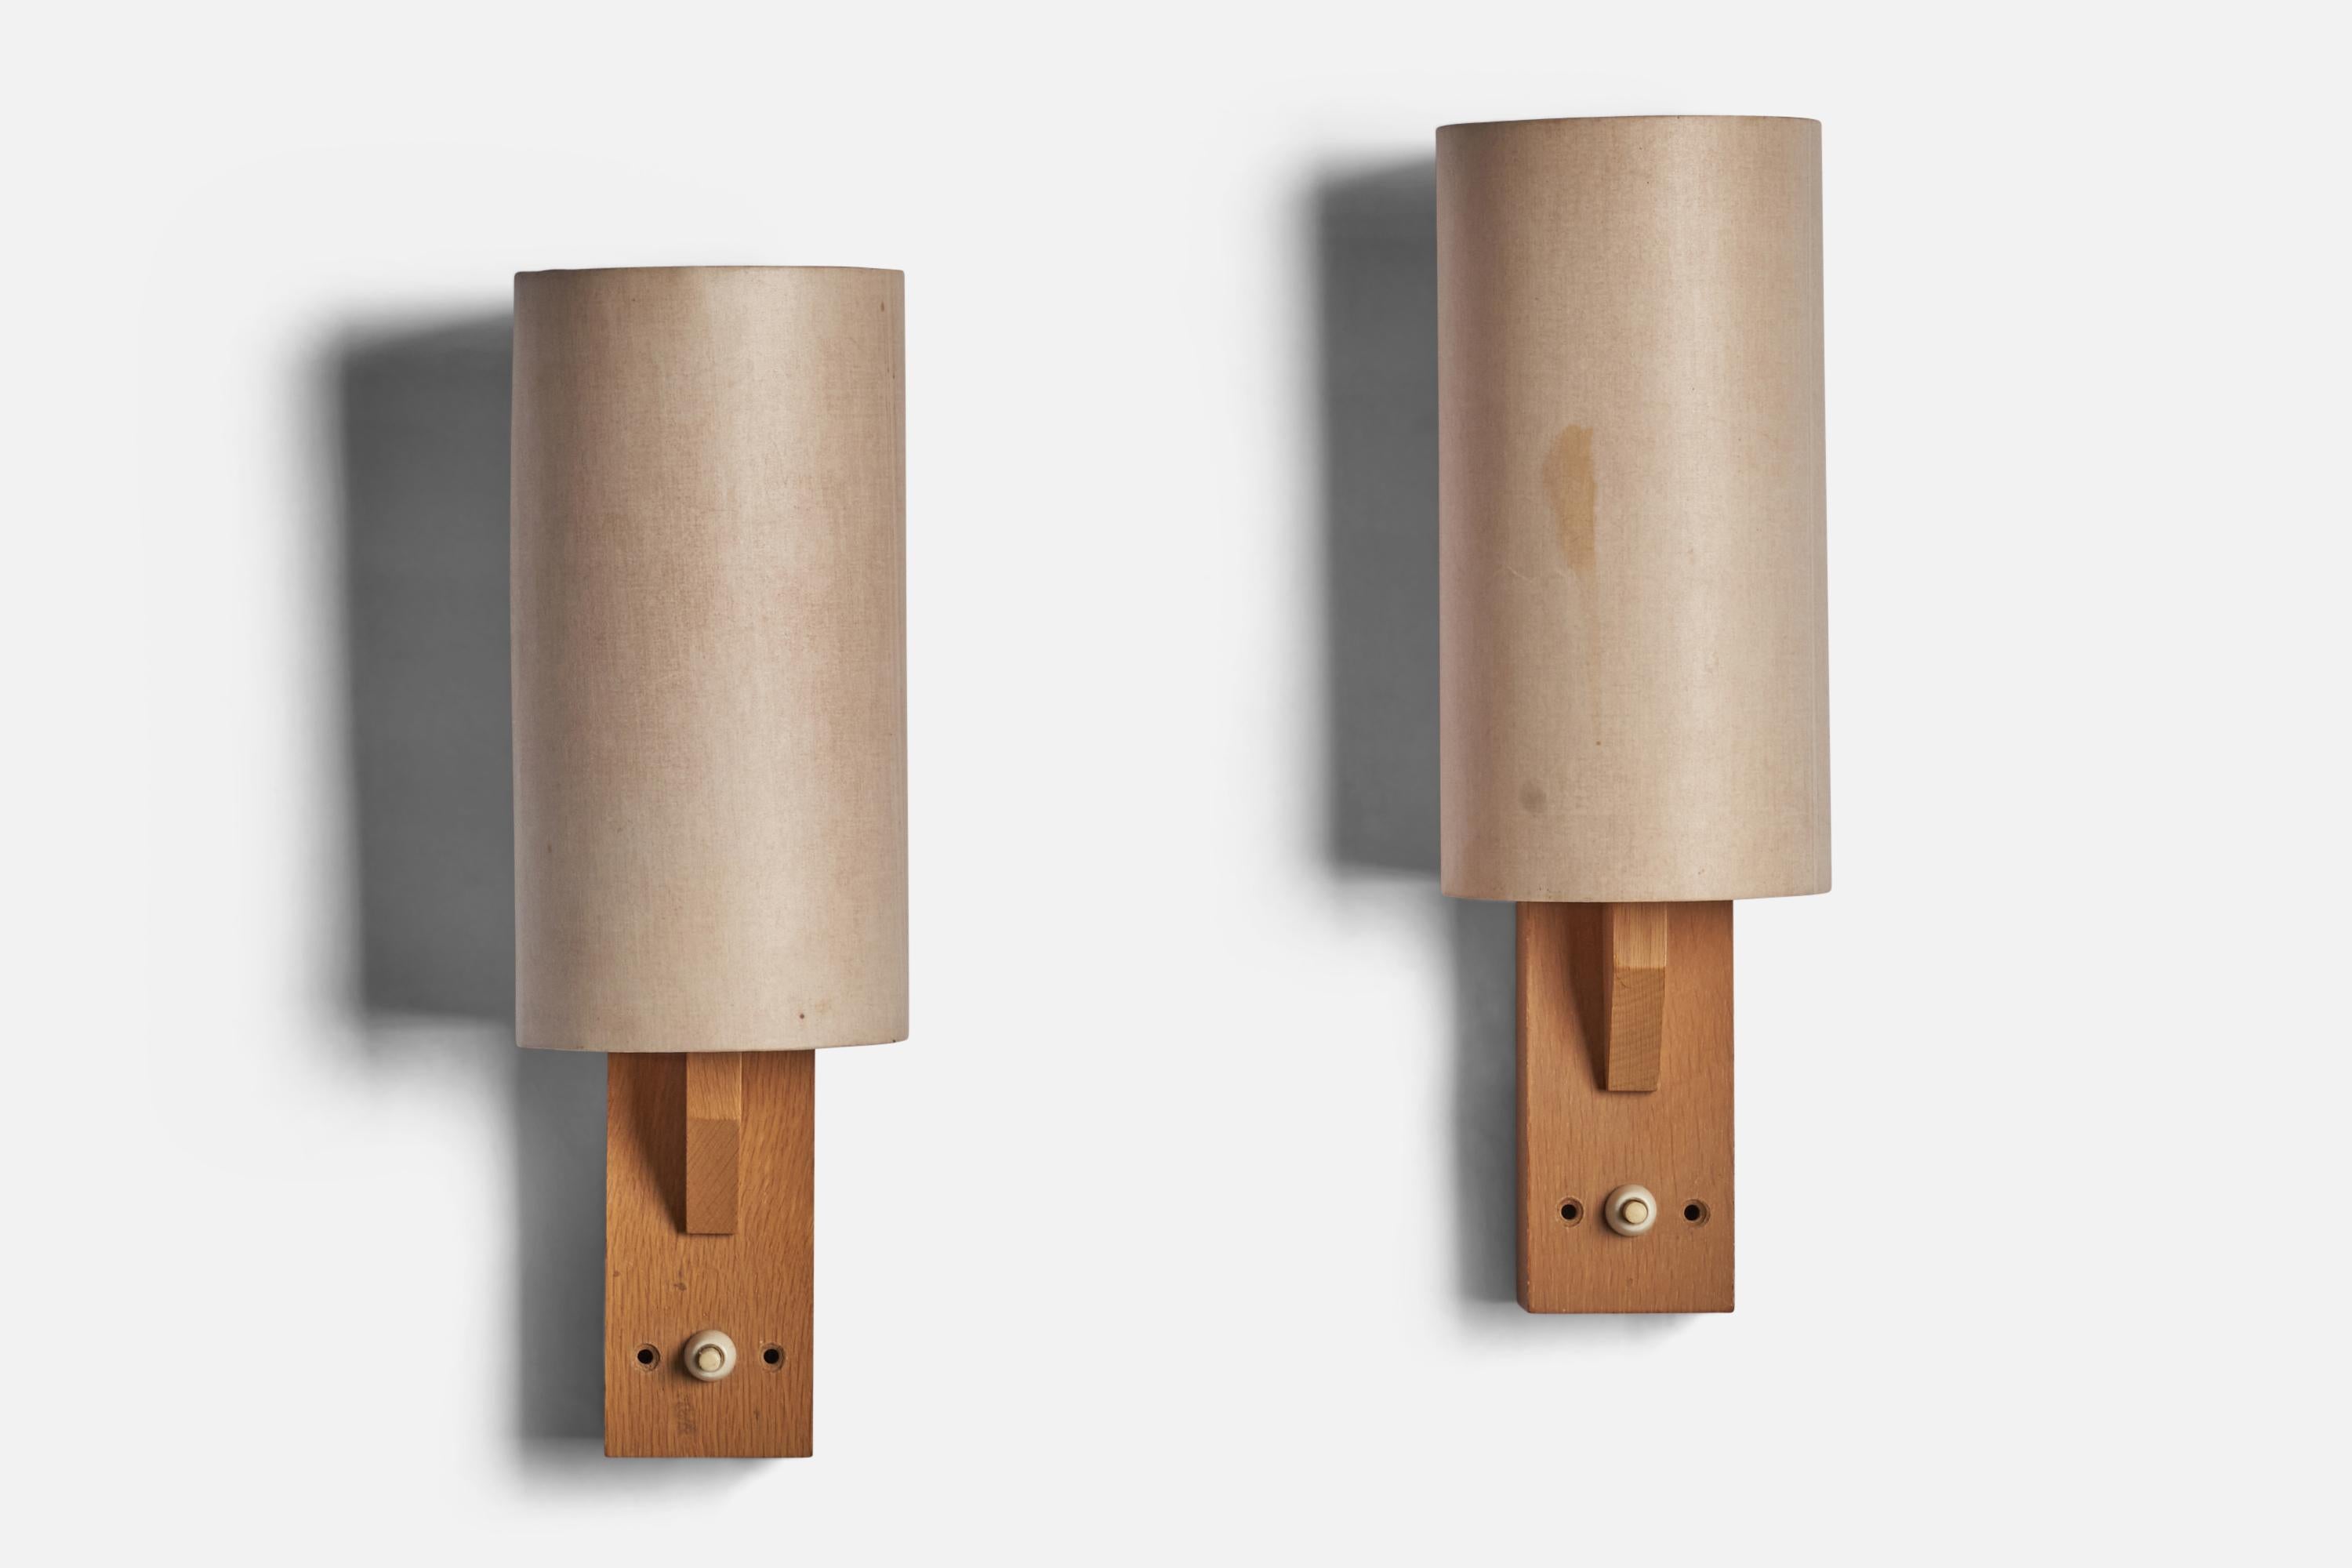 A pair of oak and off-white paper wall lights designed and produced in Sweden, 1970s.

Overall Dimensions (inches): 13.25” H x 4.5” W x 4.75” D
Back Plate Dimensions (inches): 4.6” H x 2.45” W
Bulb Specifications: E-26 Bulb
Number of Sockets: 1

All